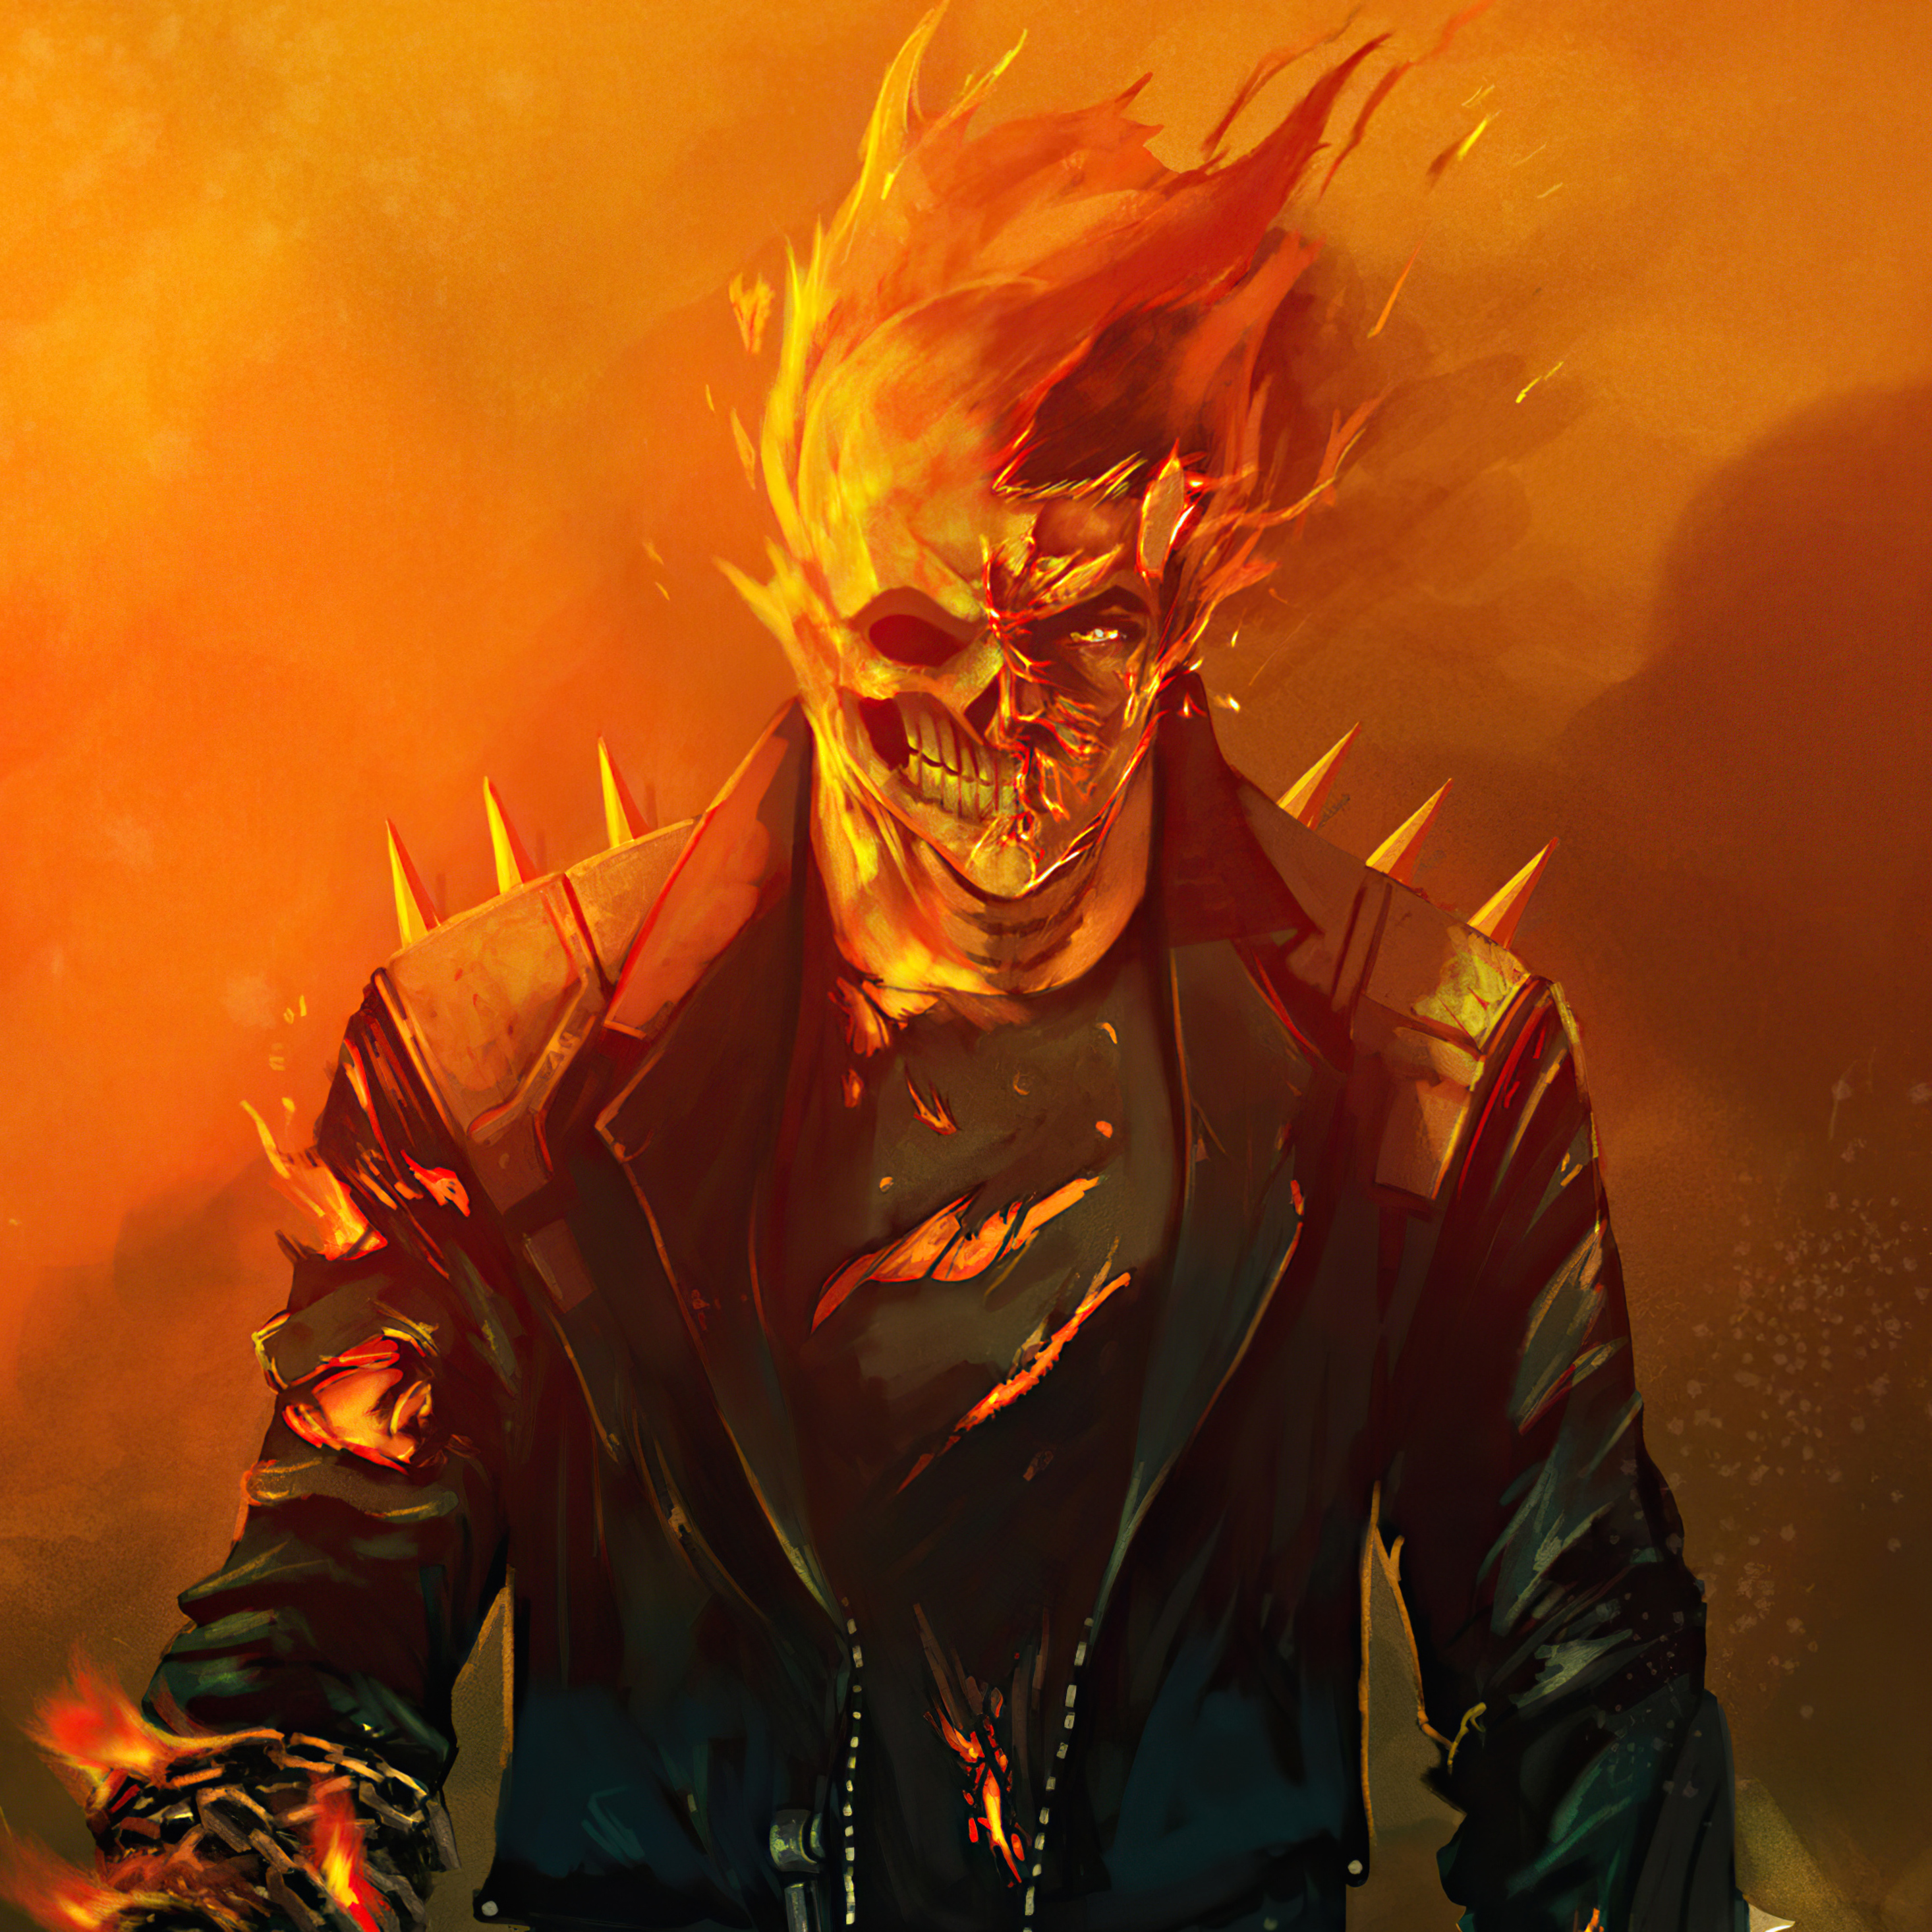 Ghost Rider Cool Illustration Wallpapers